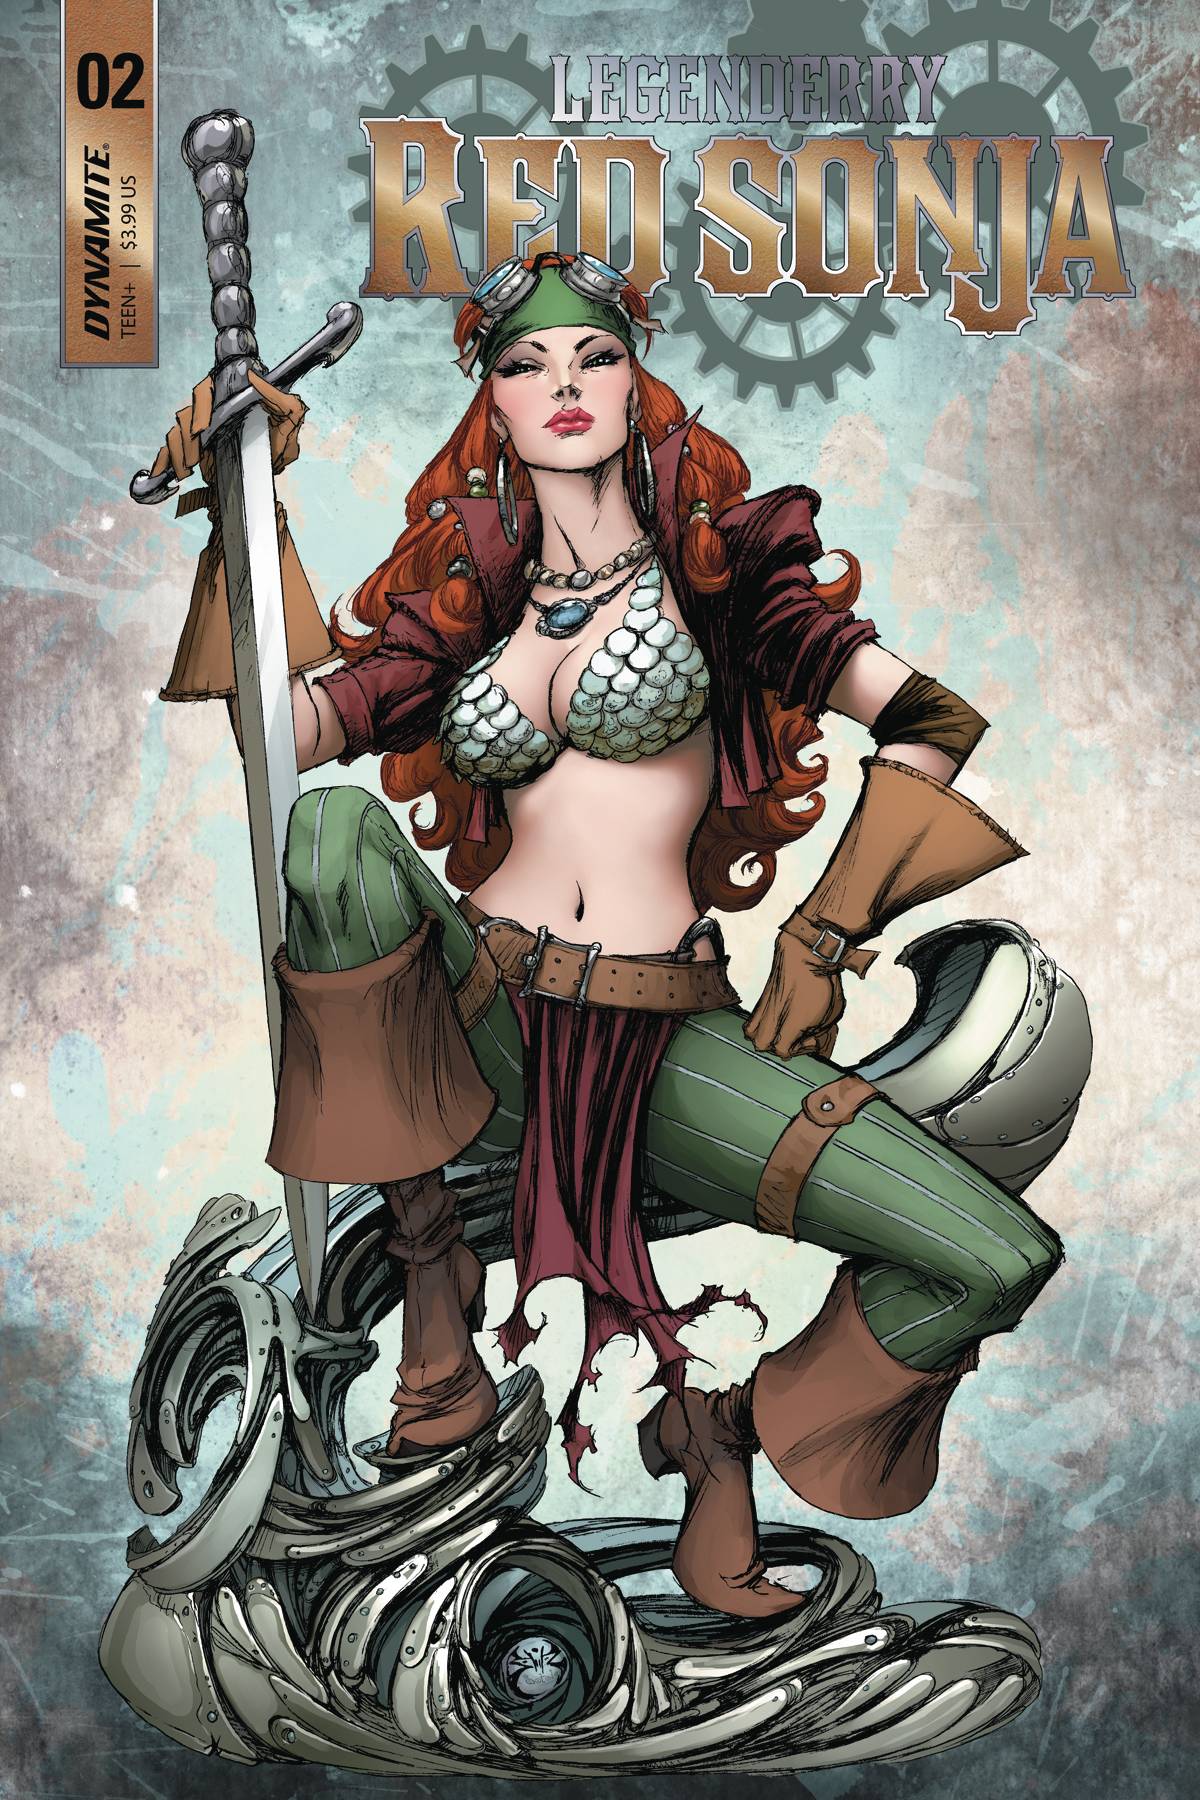 Legenderry Red Sonja #2 Cover A Benitez (Of 5)